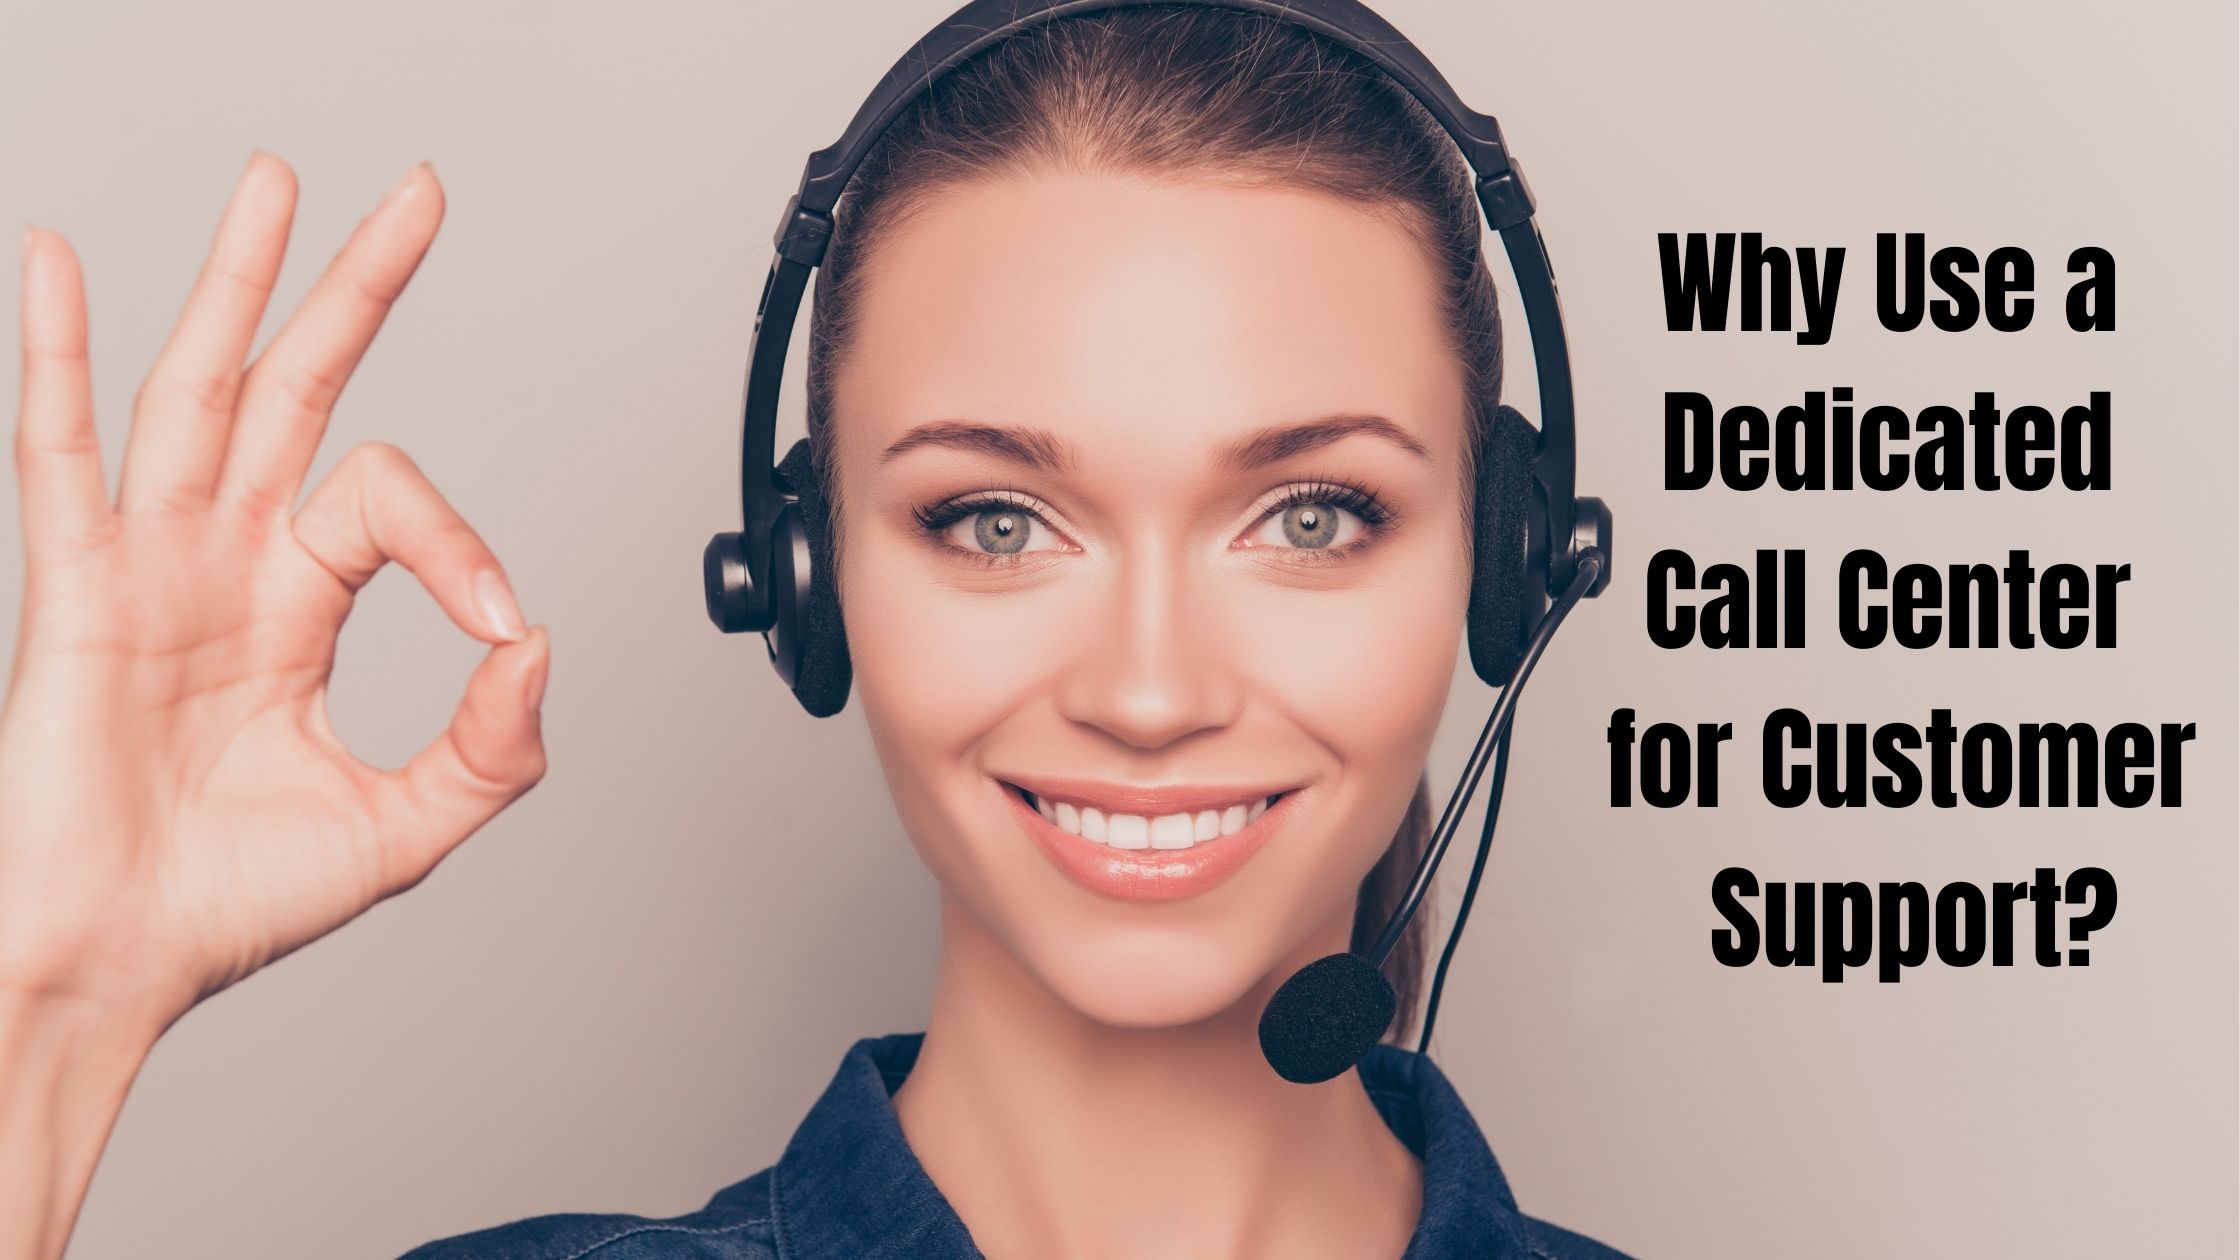 Why Use a Dedicated Call Center for Customer Support?